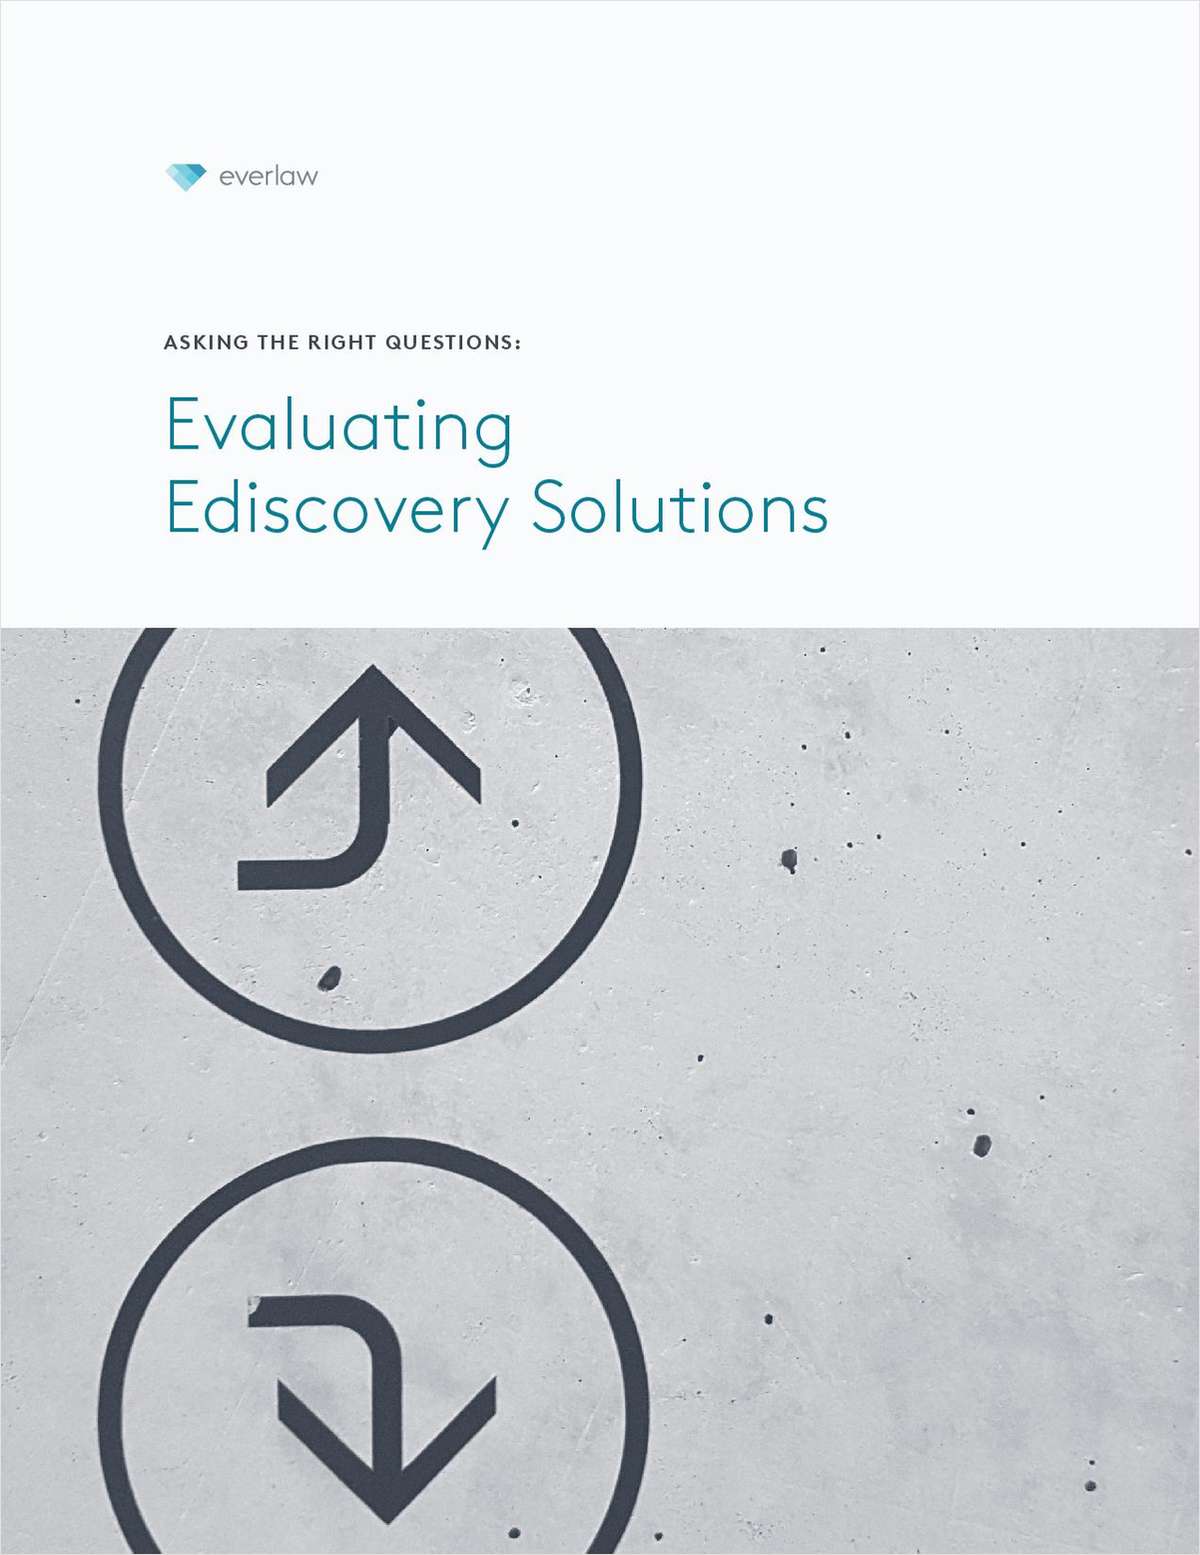 Asking the Right Questions: Evaluating Ediscovery Solutions